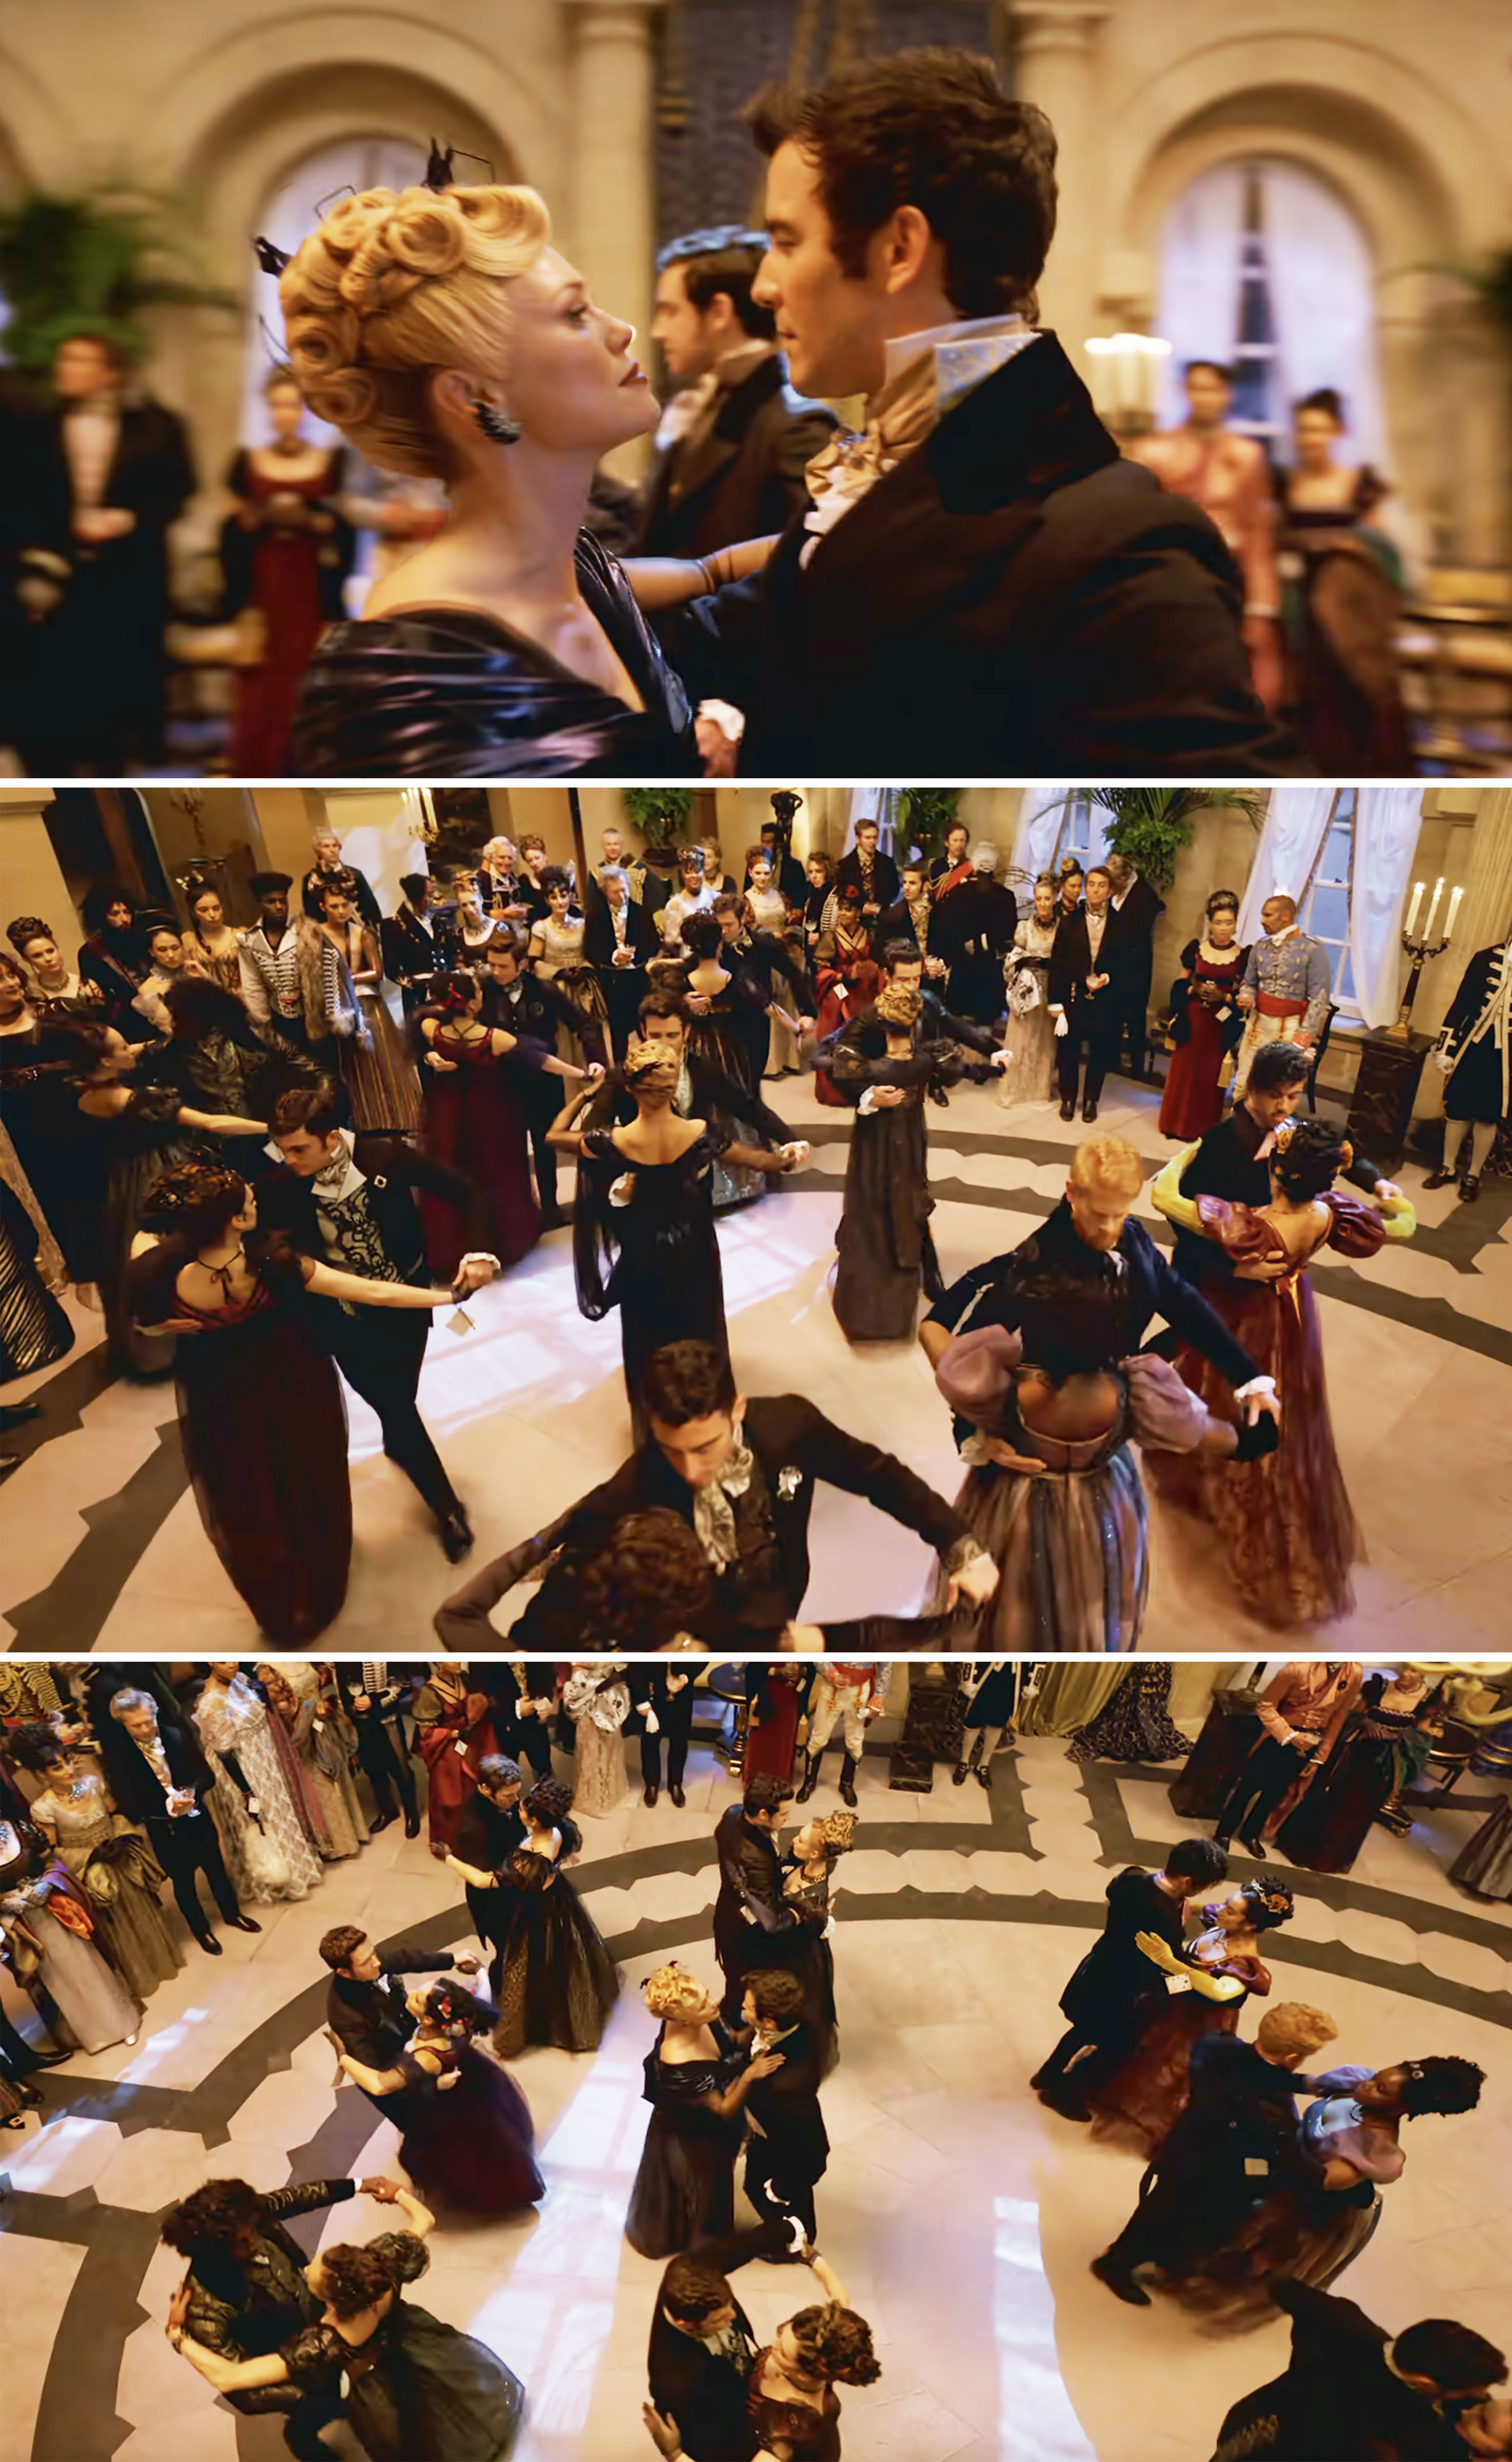 Benedict and Tilley Arnold dancing in a ballroom